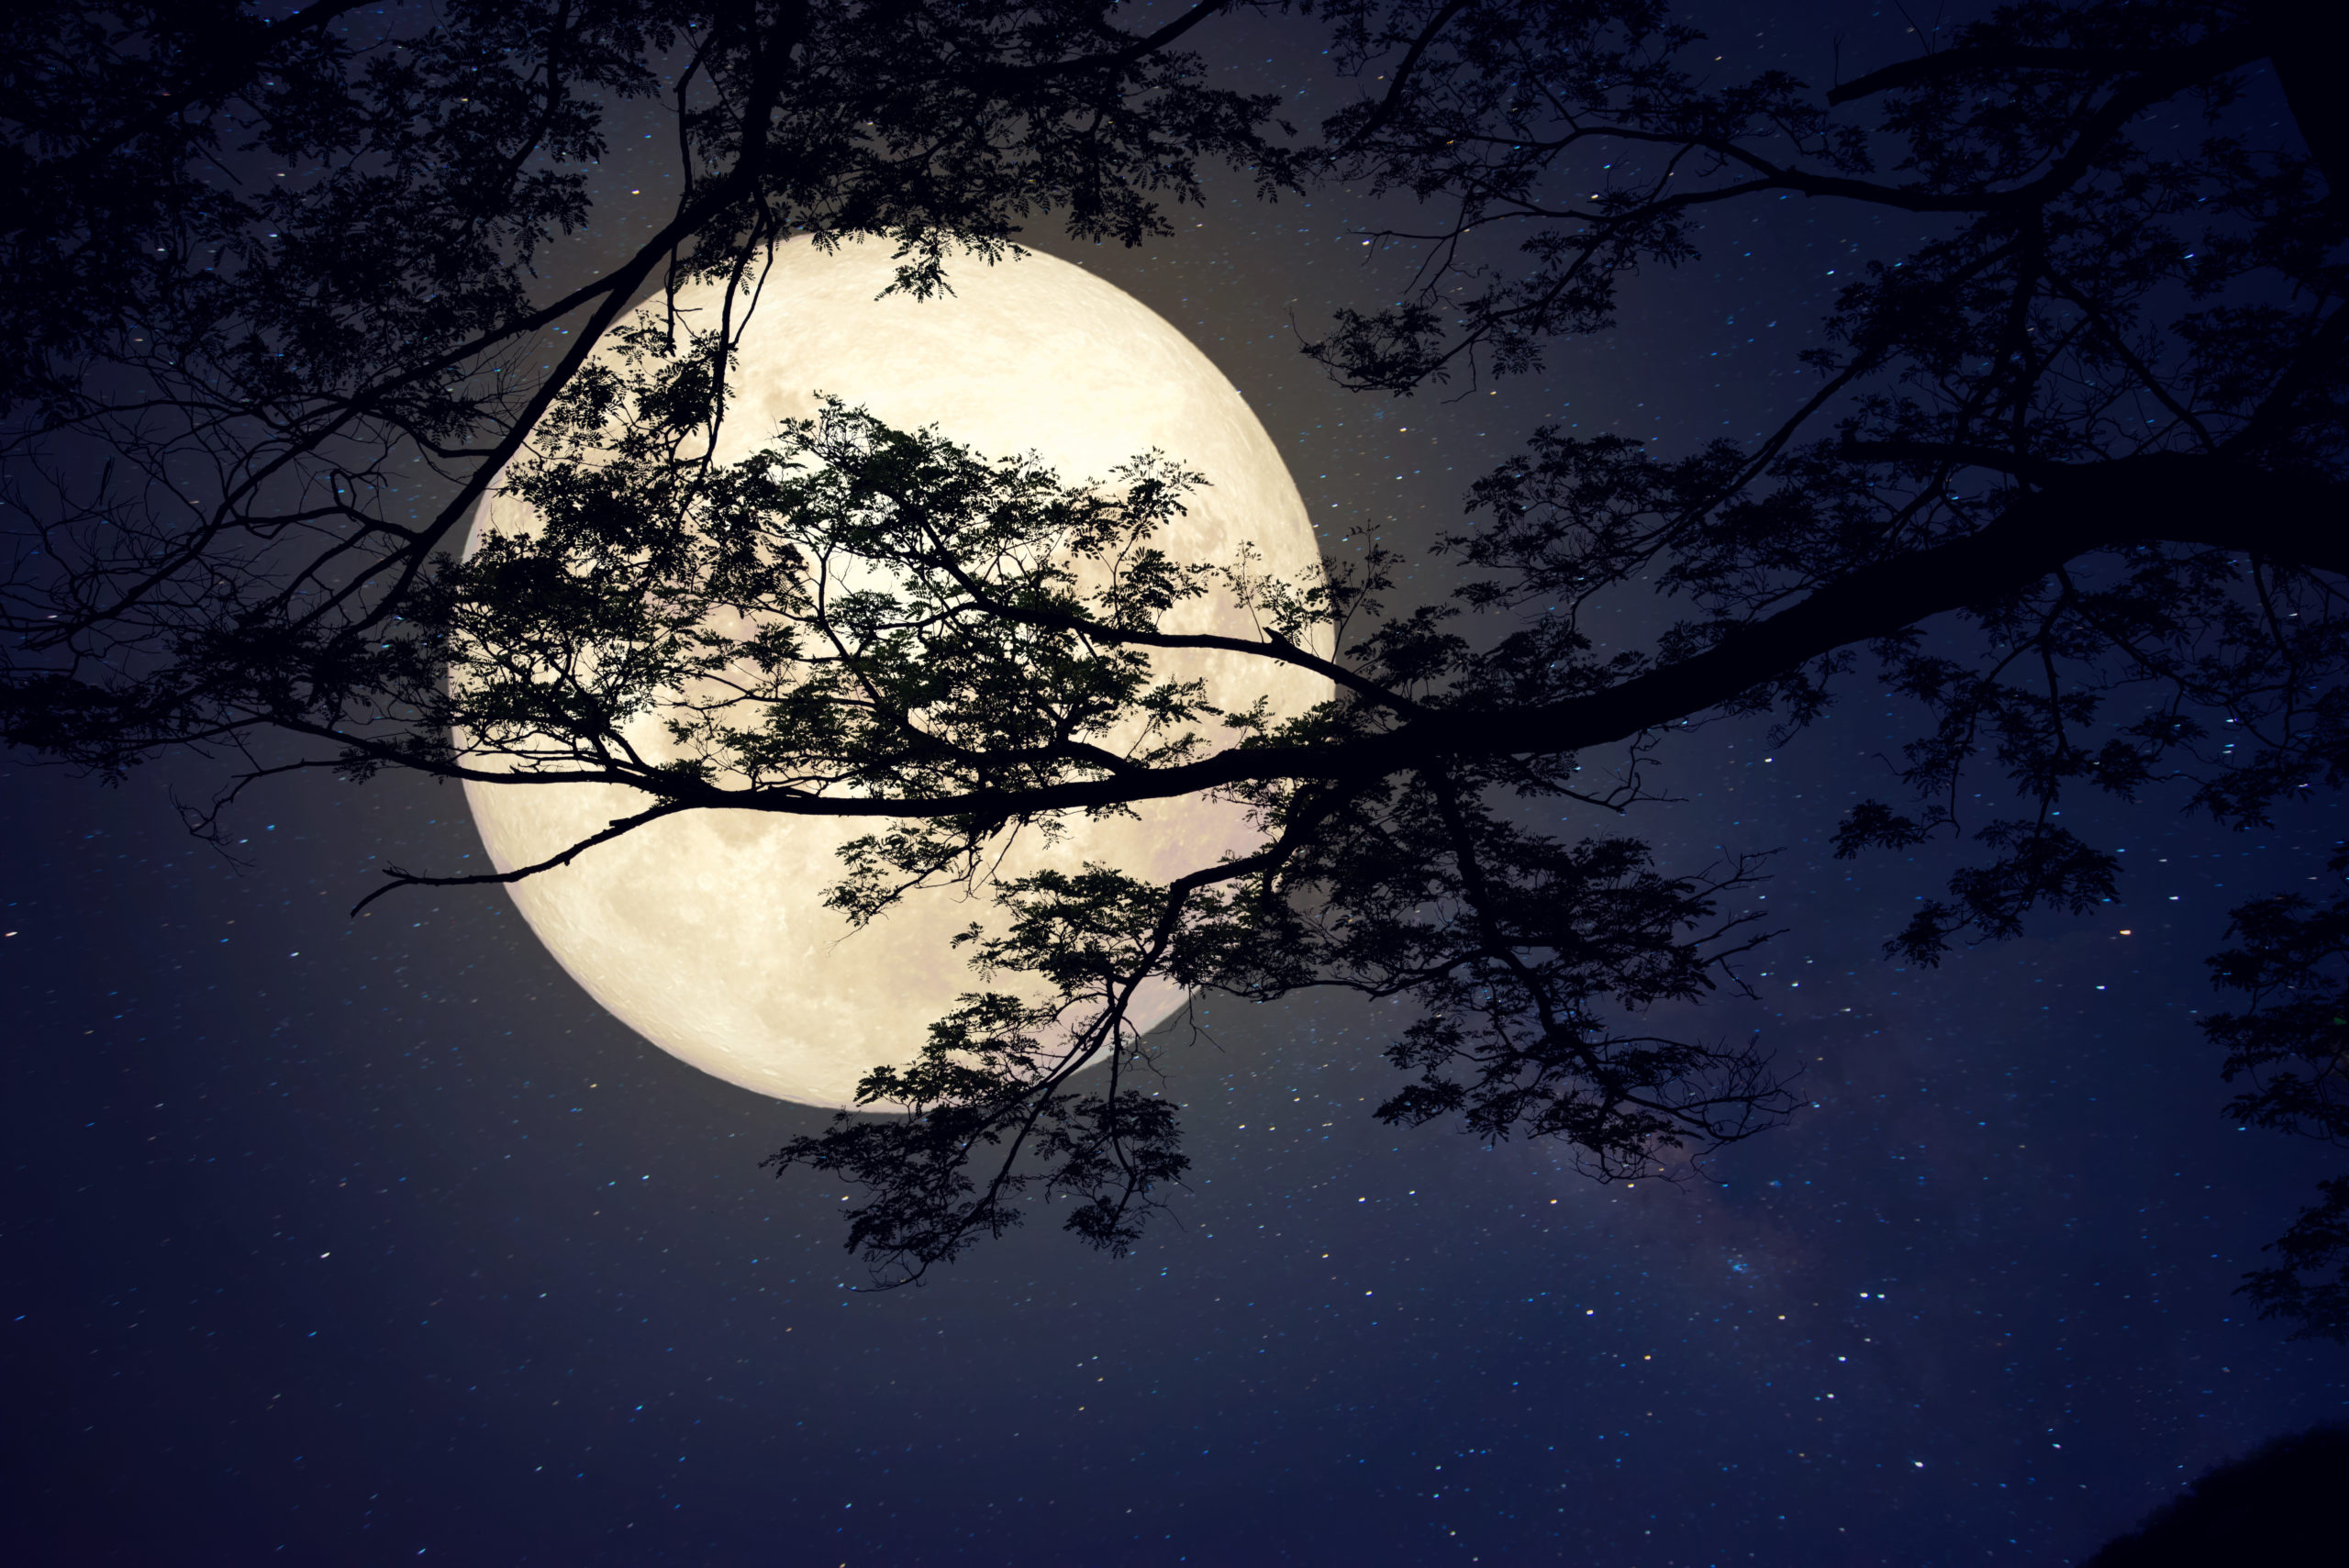 Moon on the night sky behind tree branches.